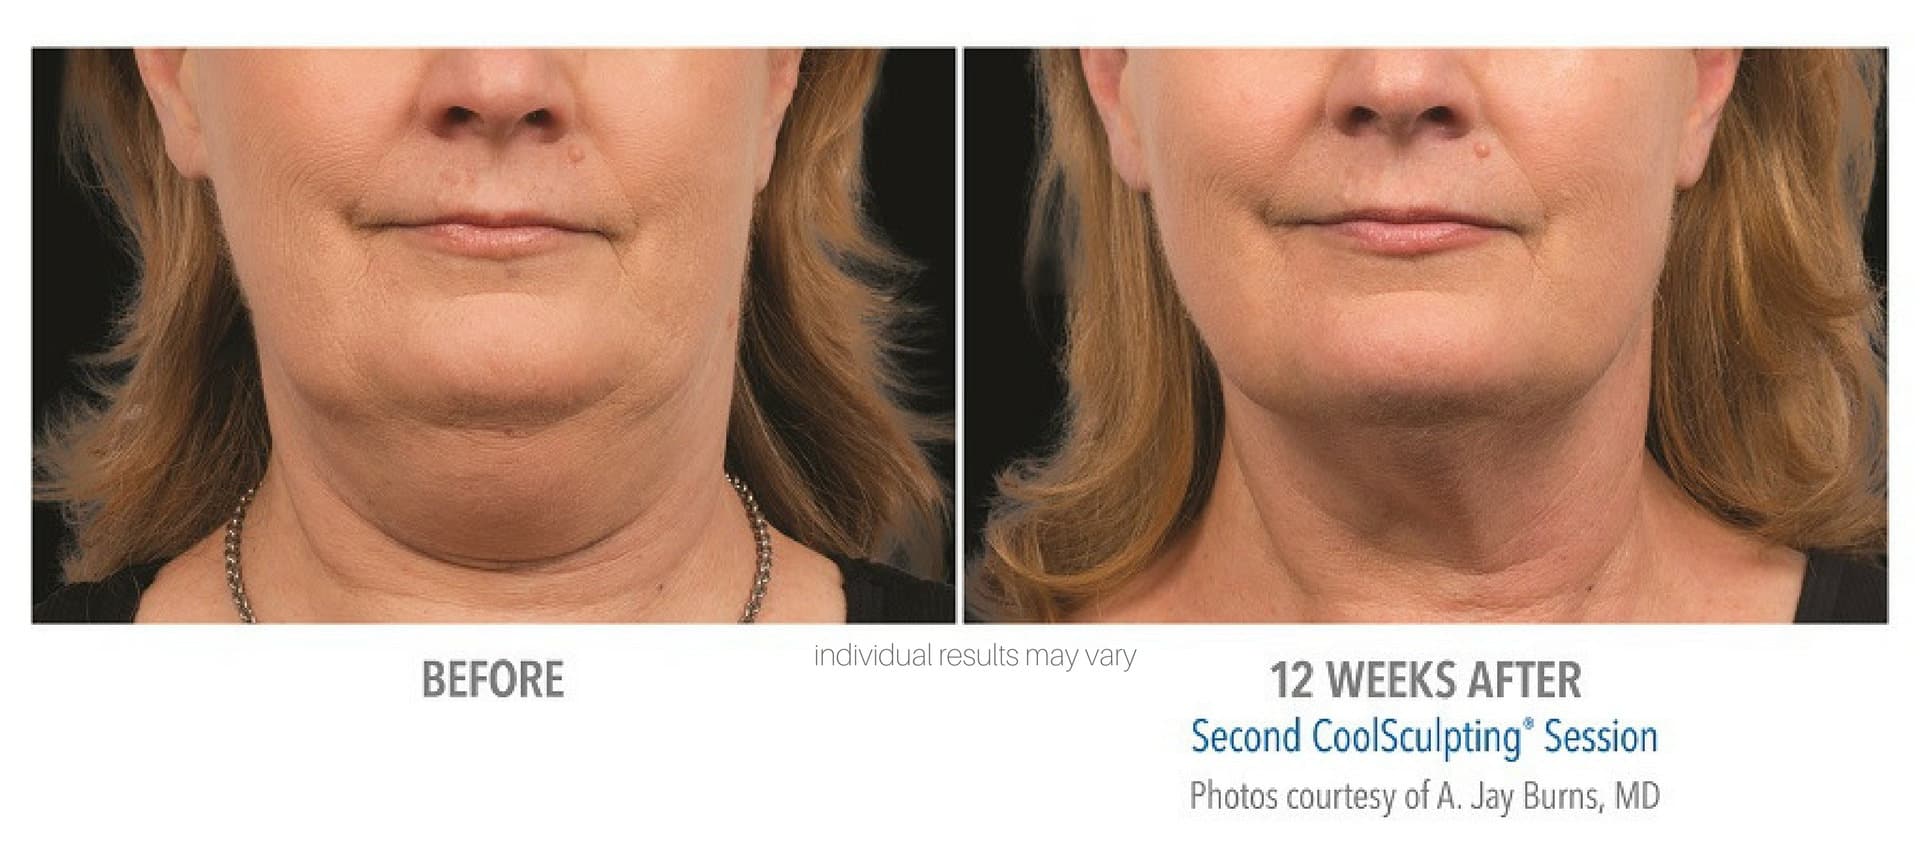 necbs-coolsculpting-before-after-3